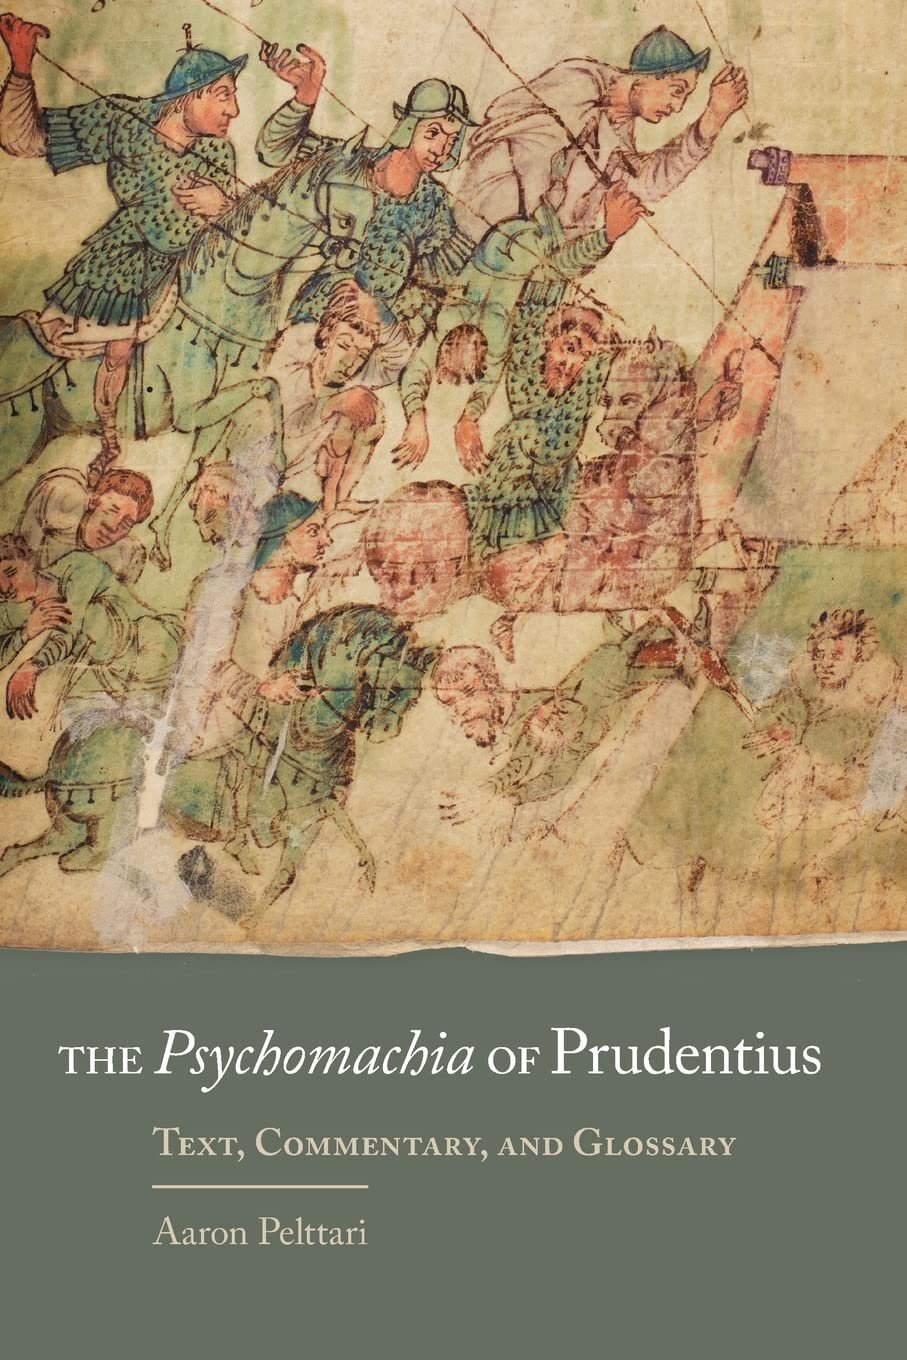 Psychomachia of Prudentius: Text, Commentary, and Glossary (Oklahoma Series in Classical Culture) (Volume 58)